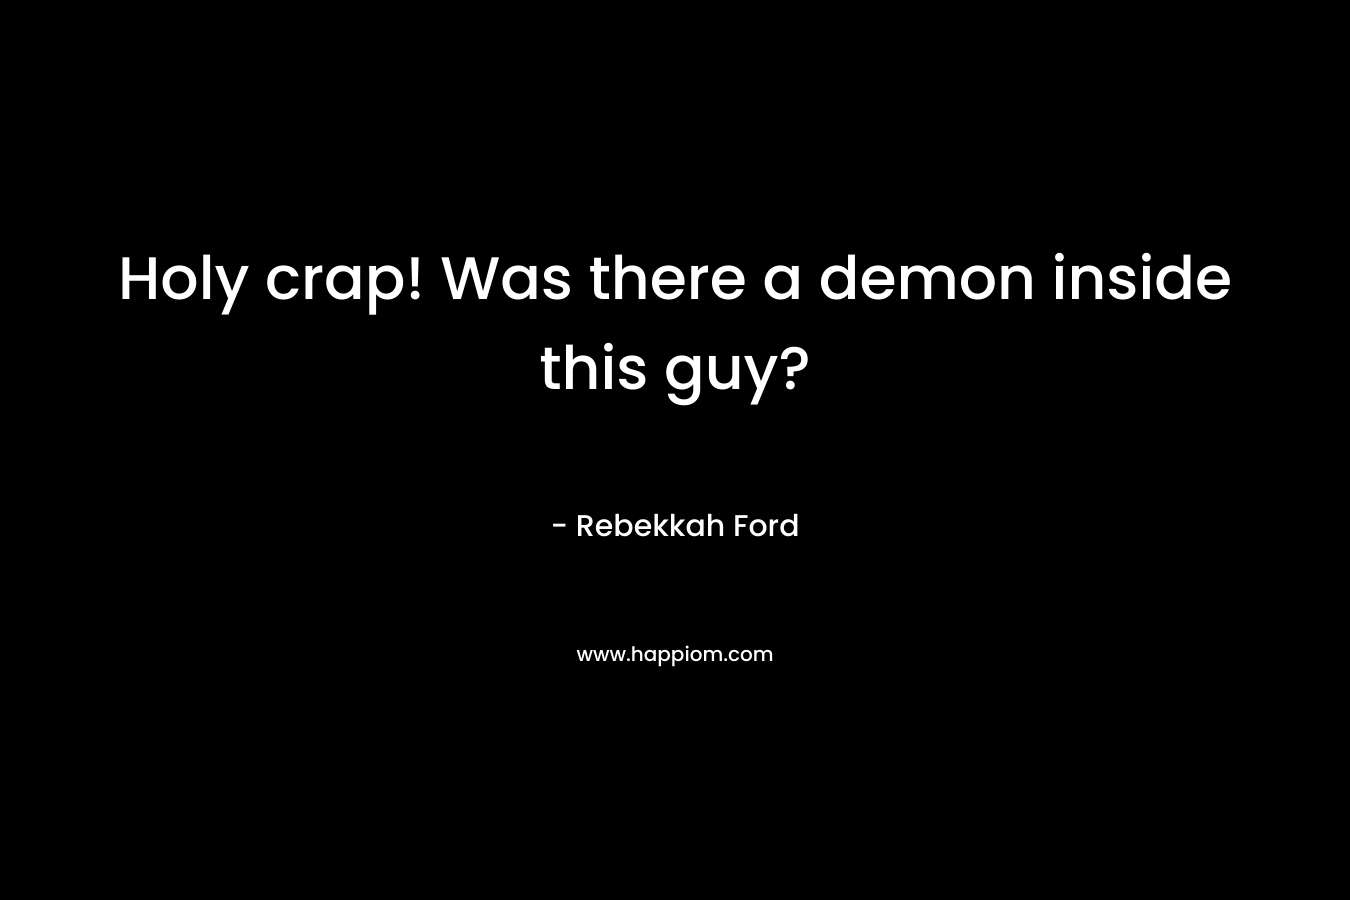 Holy crap! Was there a demon inside this guy? – Rebekkah Ford